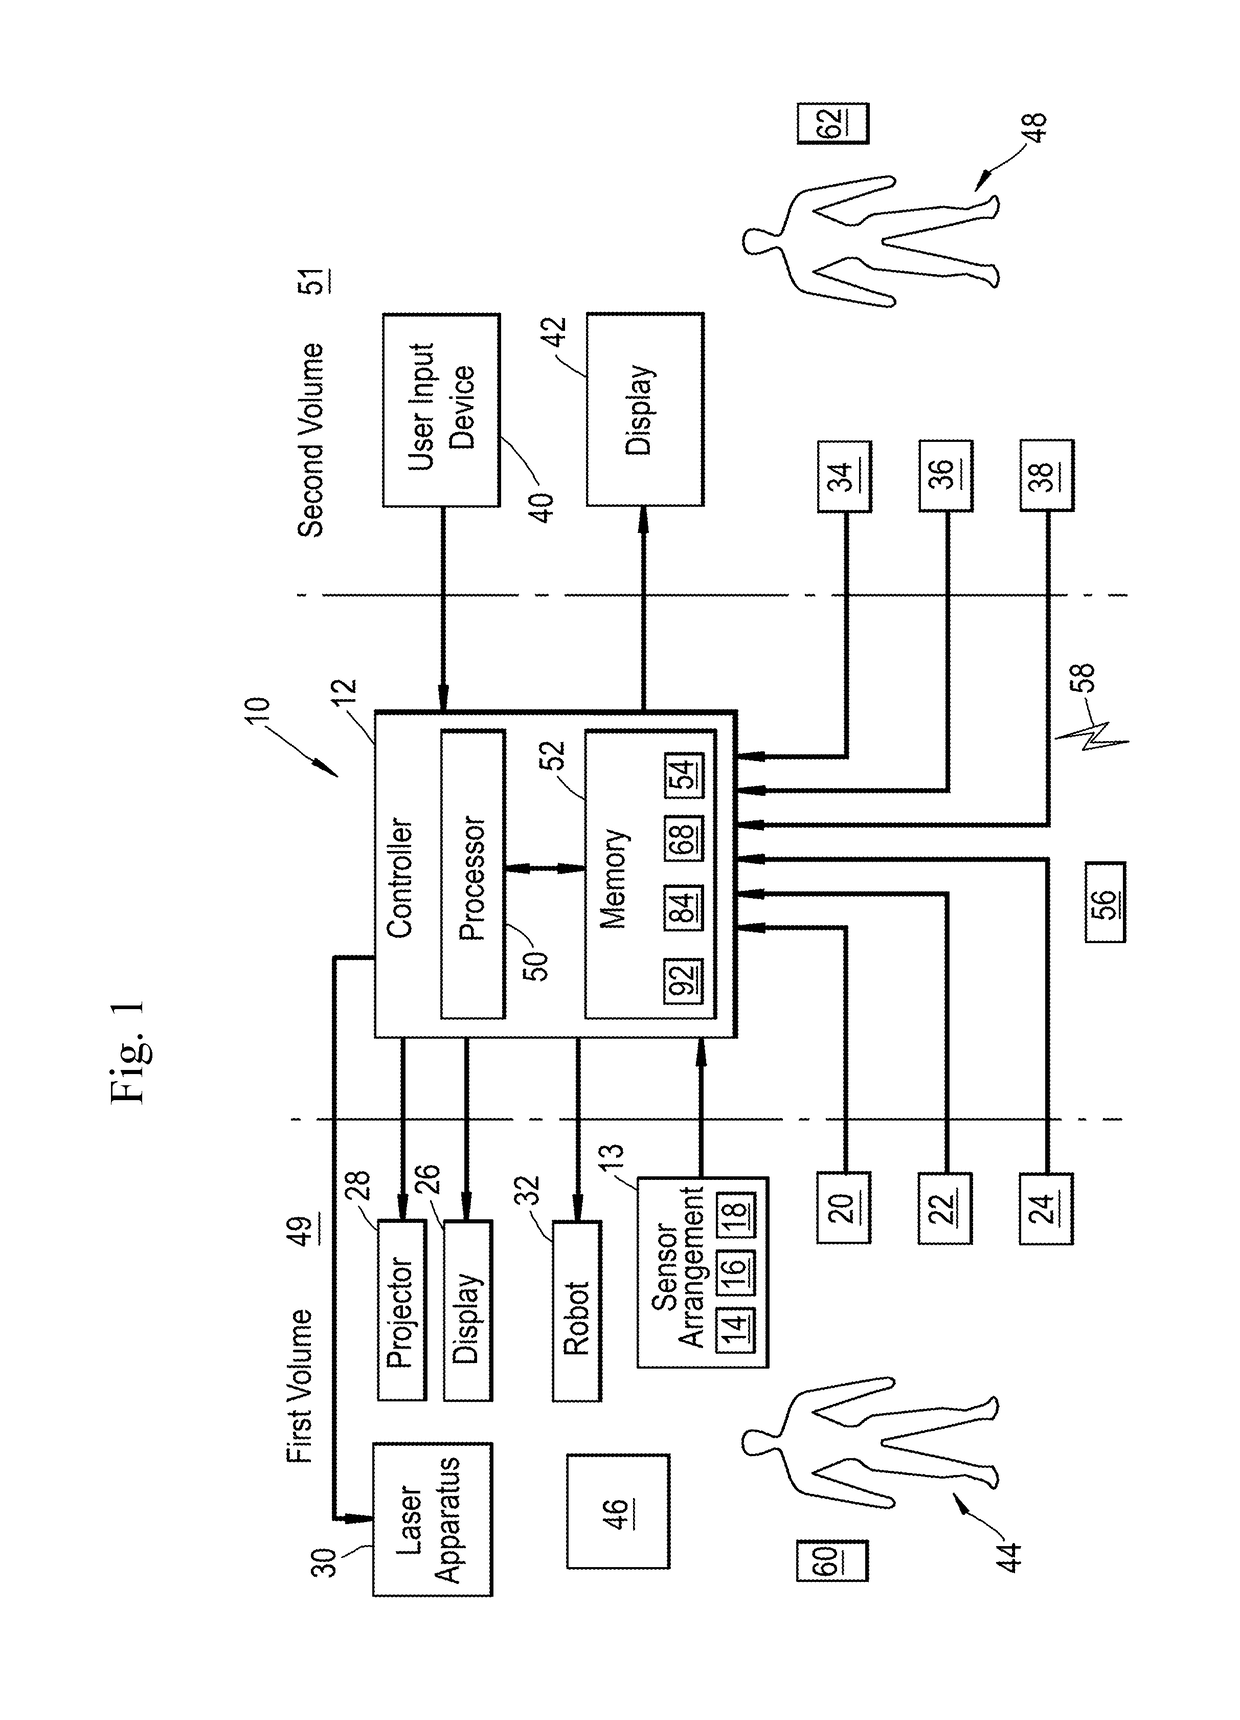 Apparatus, methods, computer programs, and non-transitory computer readable storage mediums for enabling remote control of one or more devices